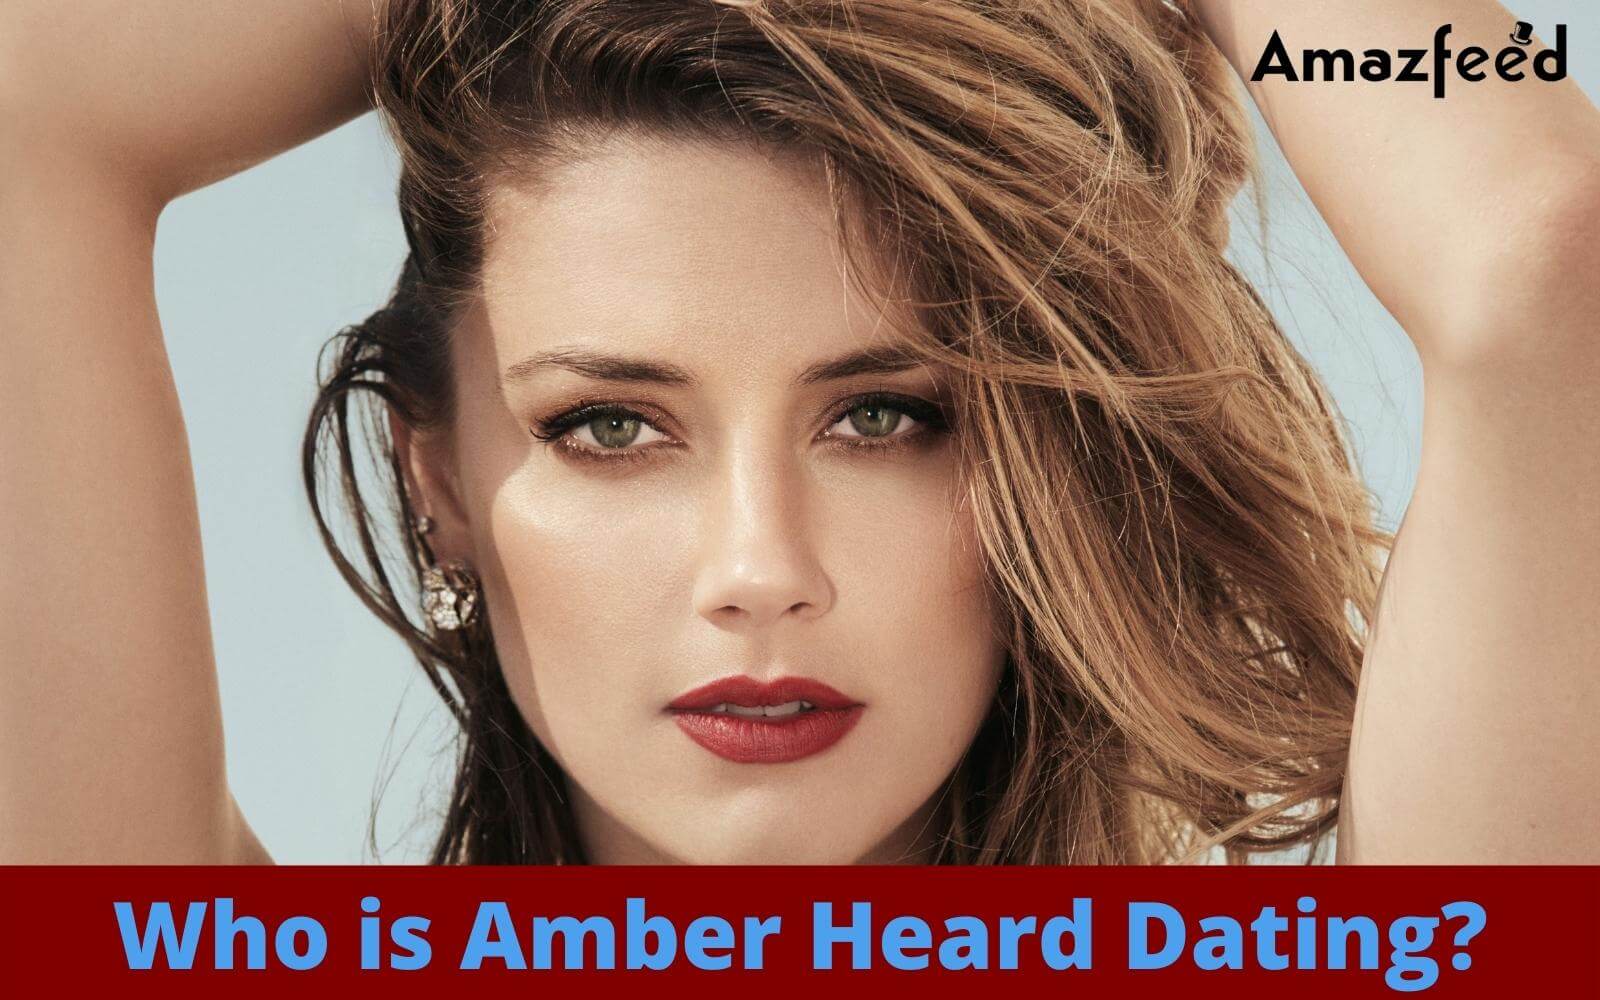 Who Is Amber Heard Dating? Elon Musk, Johnny Depp & more